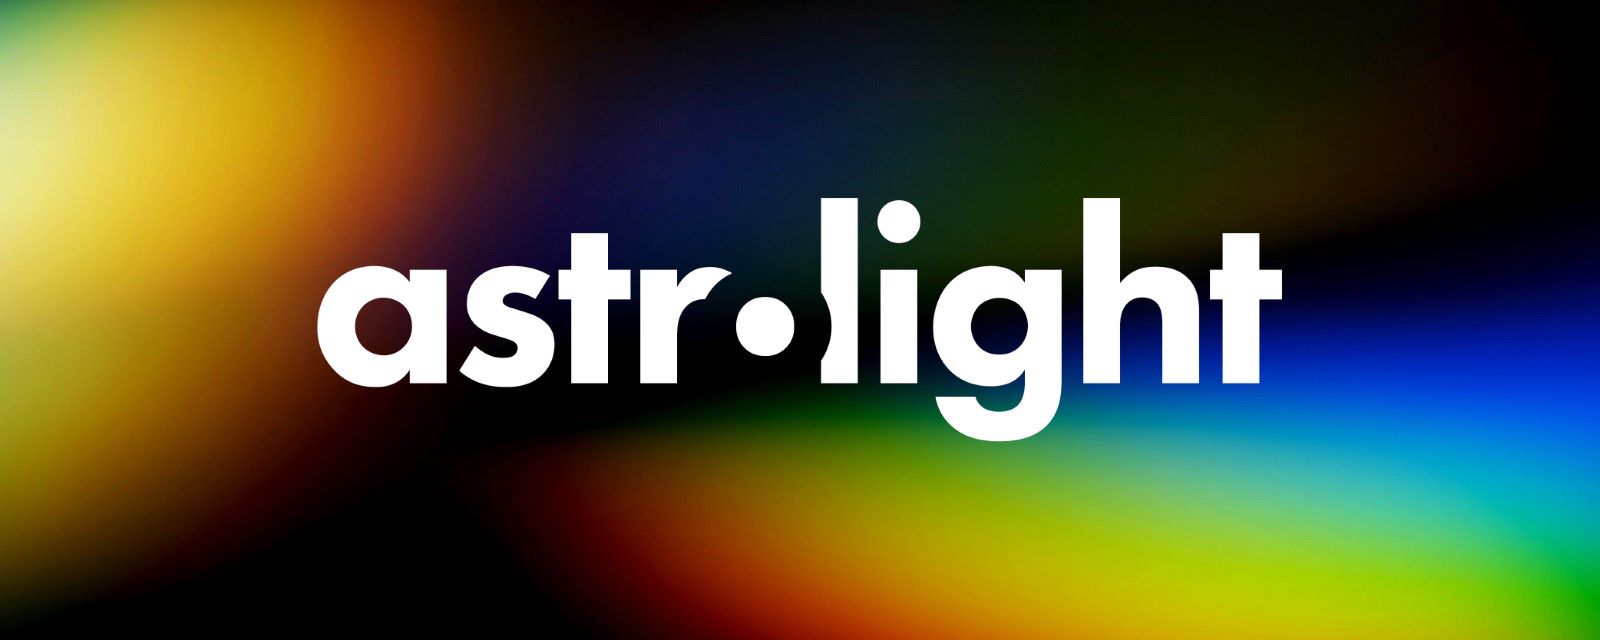 Astrolight and prism effects